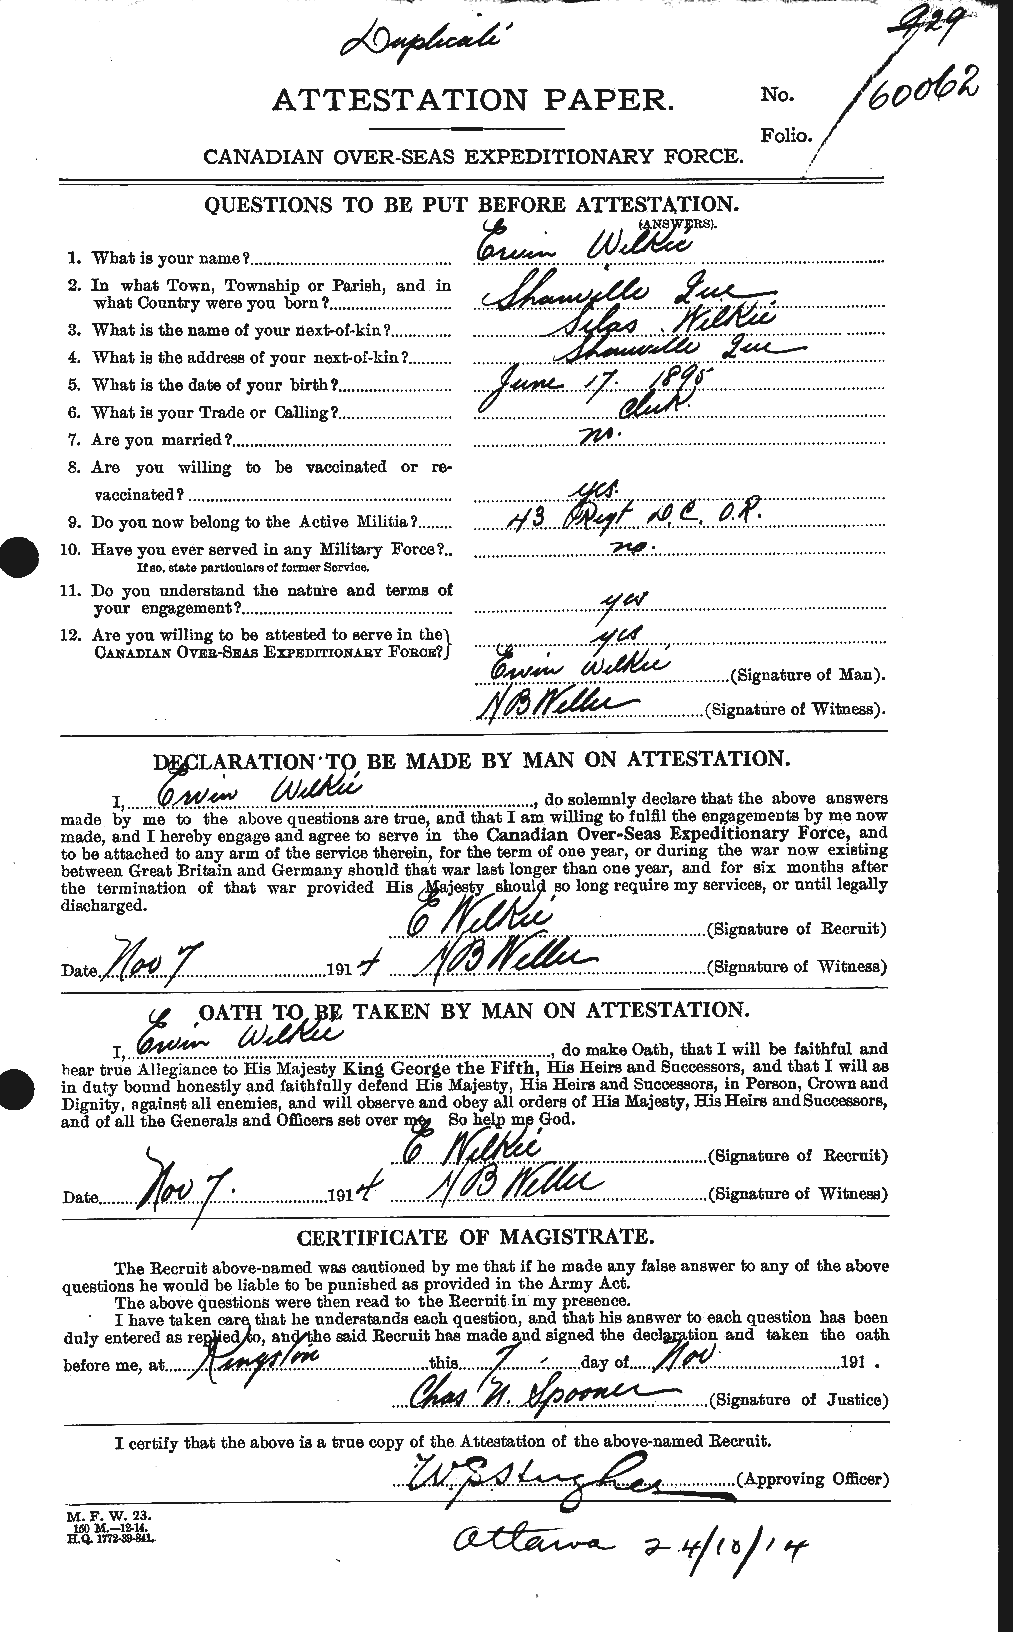 Personnel Records of the First World War - CEF 680427a